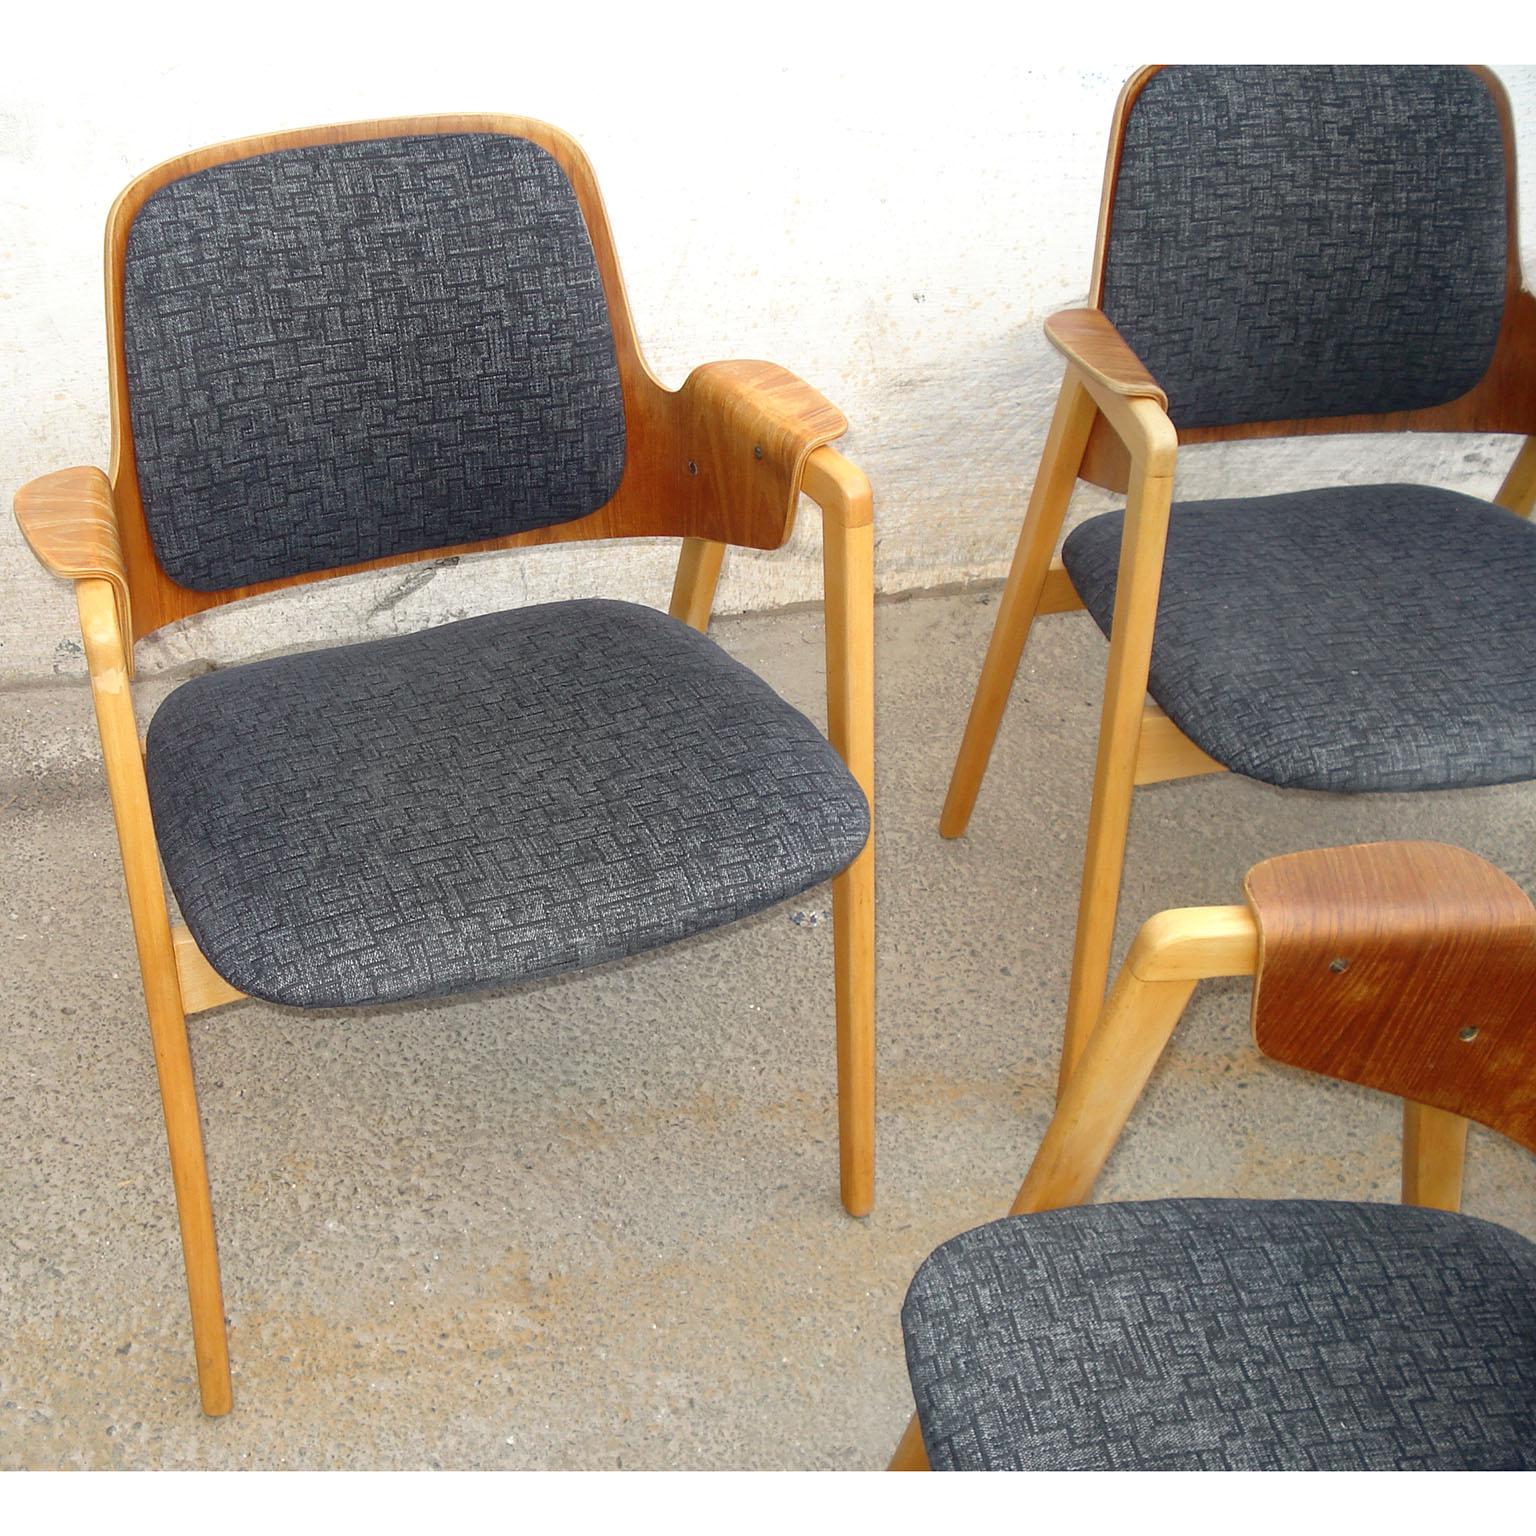 Set of 4 Elias Barup Teak Dining Chairs with Original Upholstery, 1950s Sweden For Sale 3